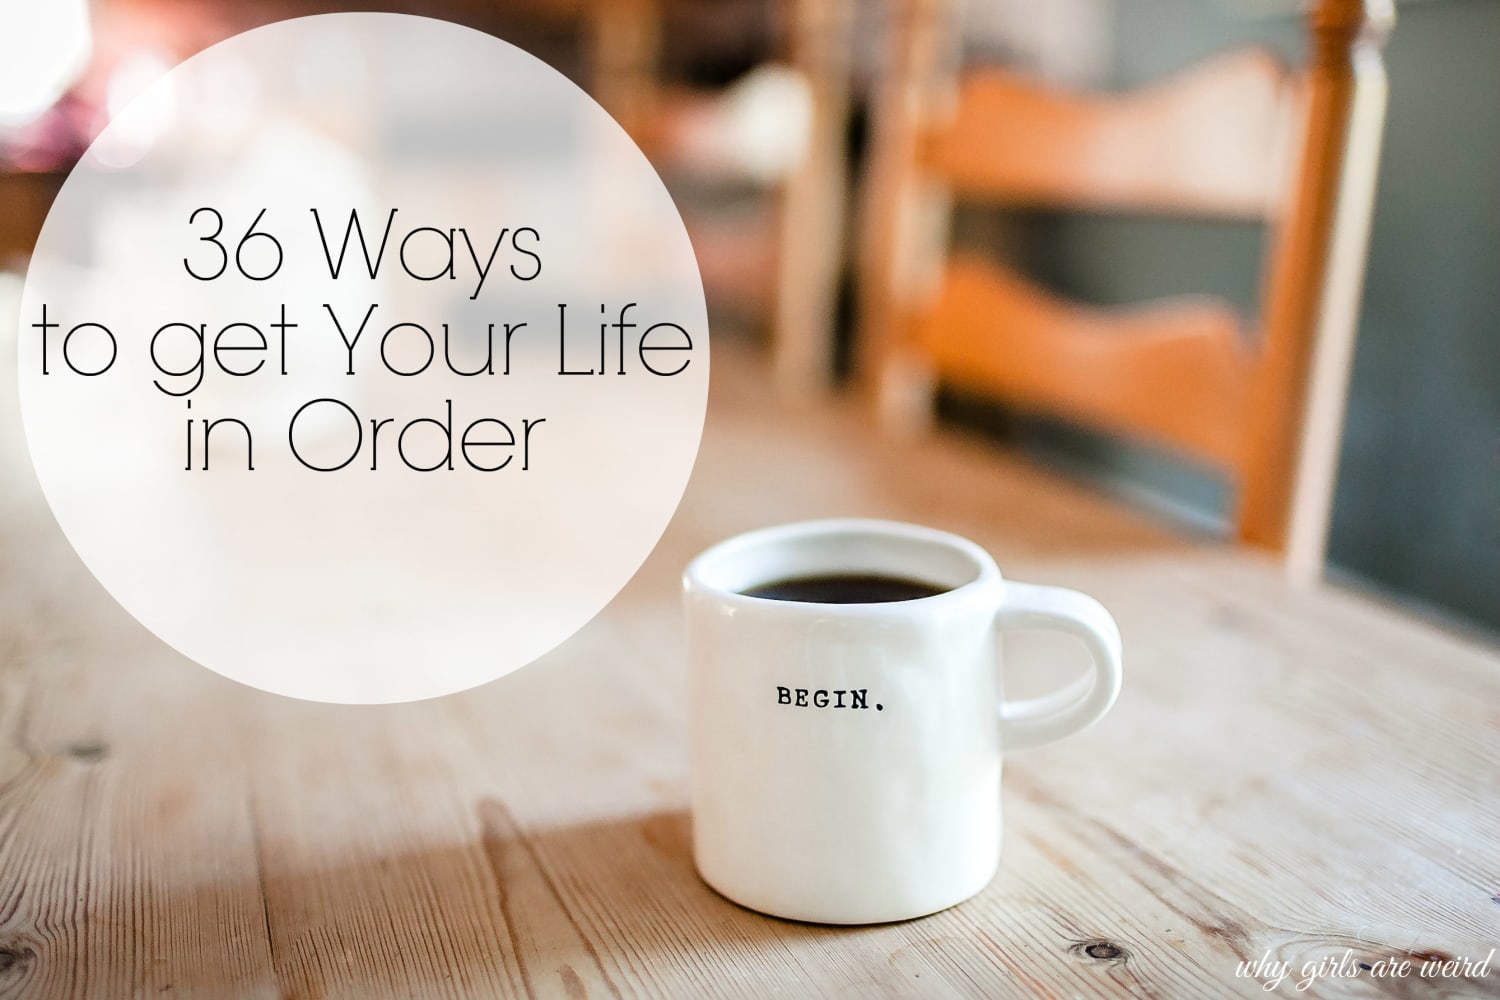 36 Ways to get Your Life in Order